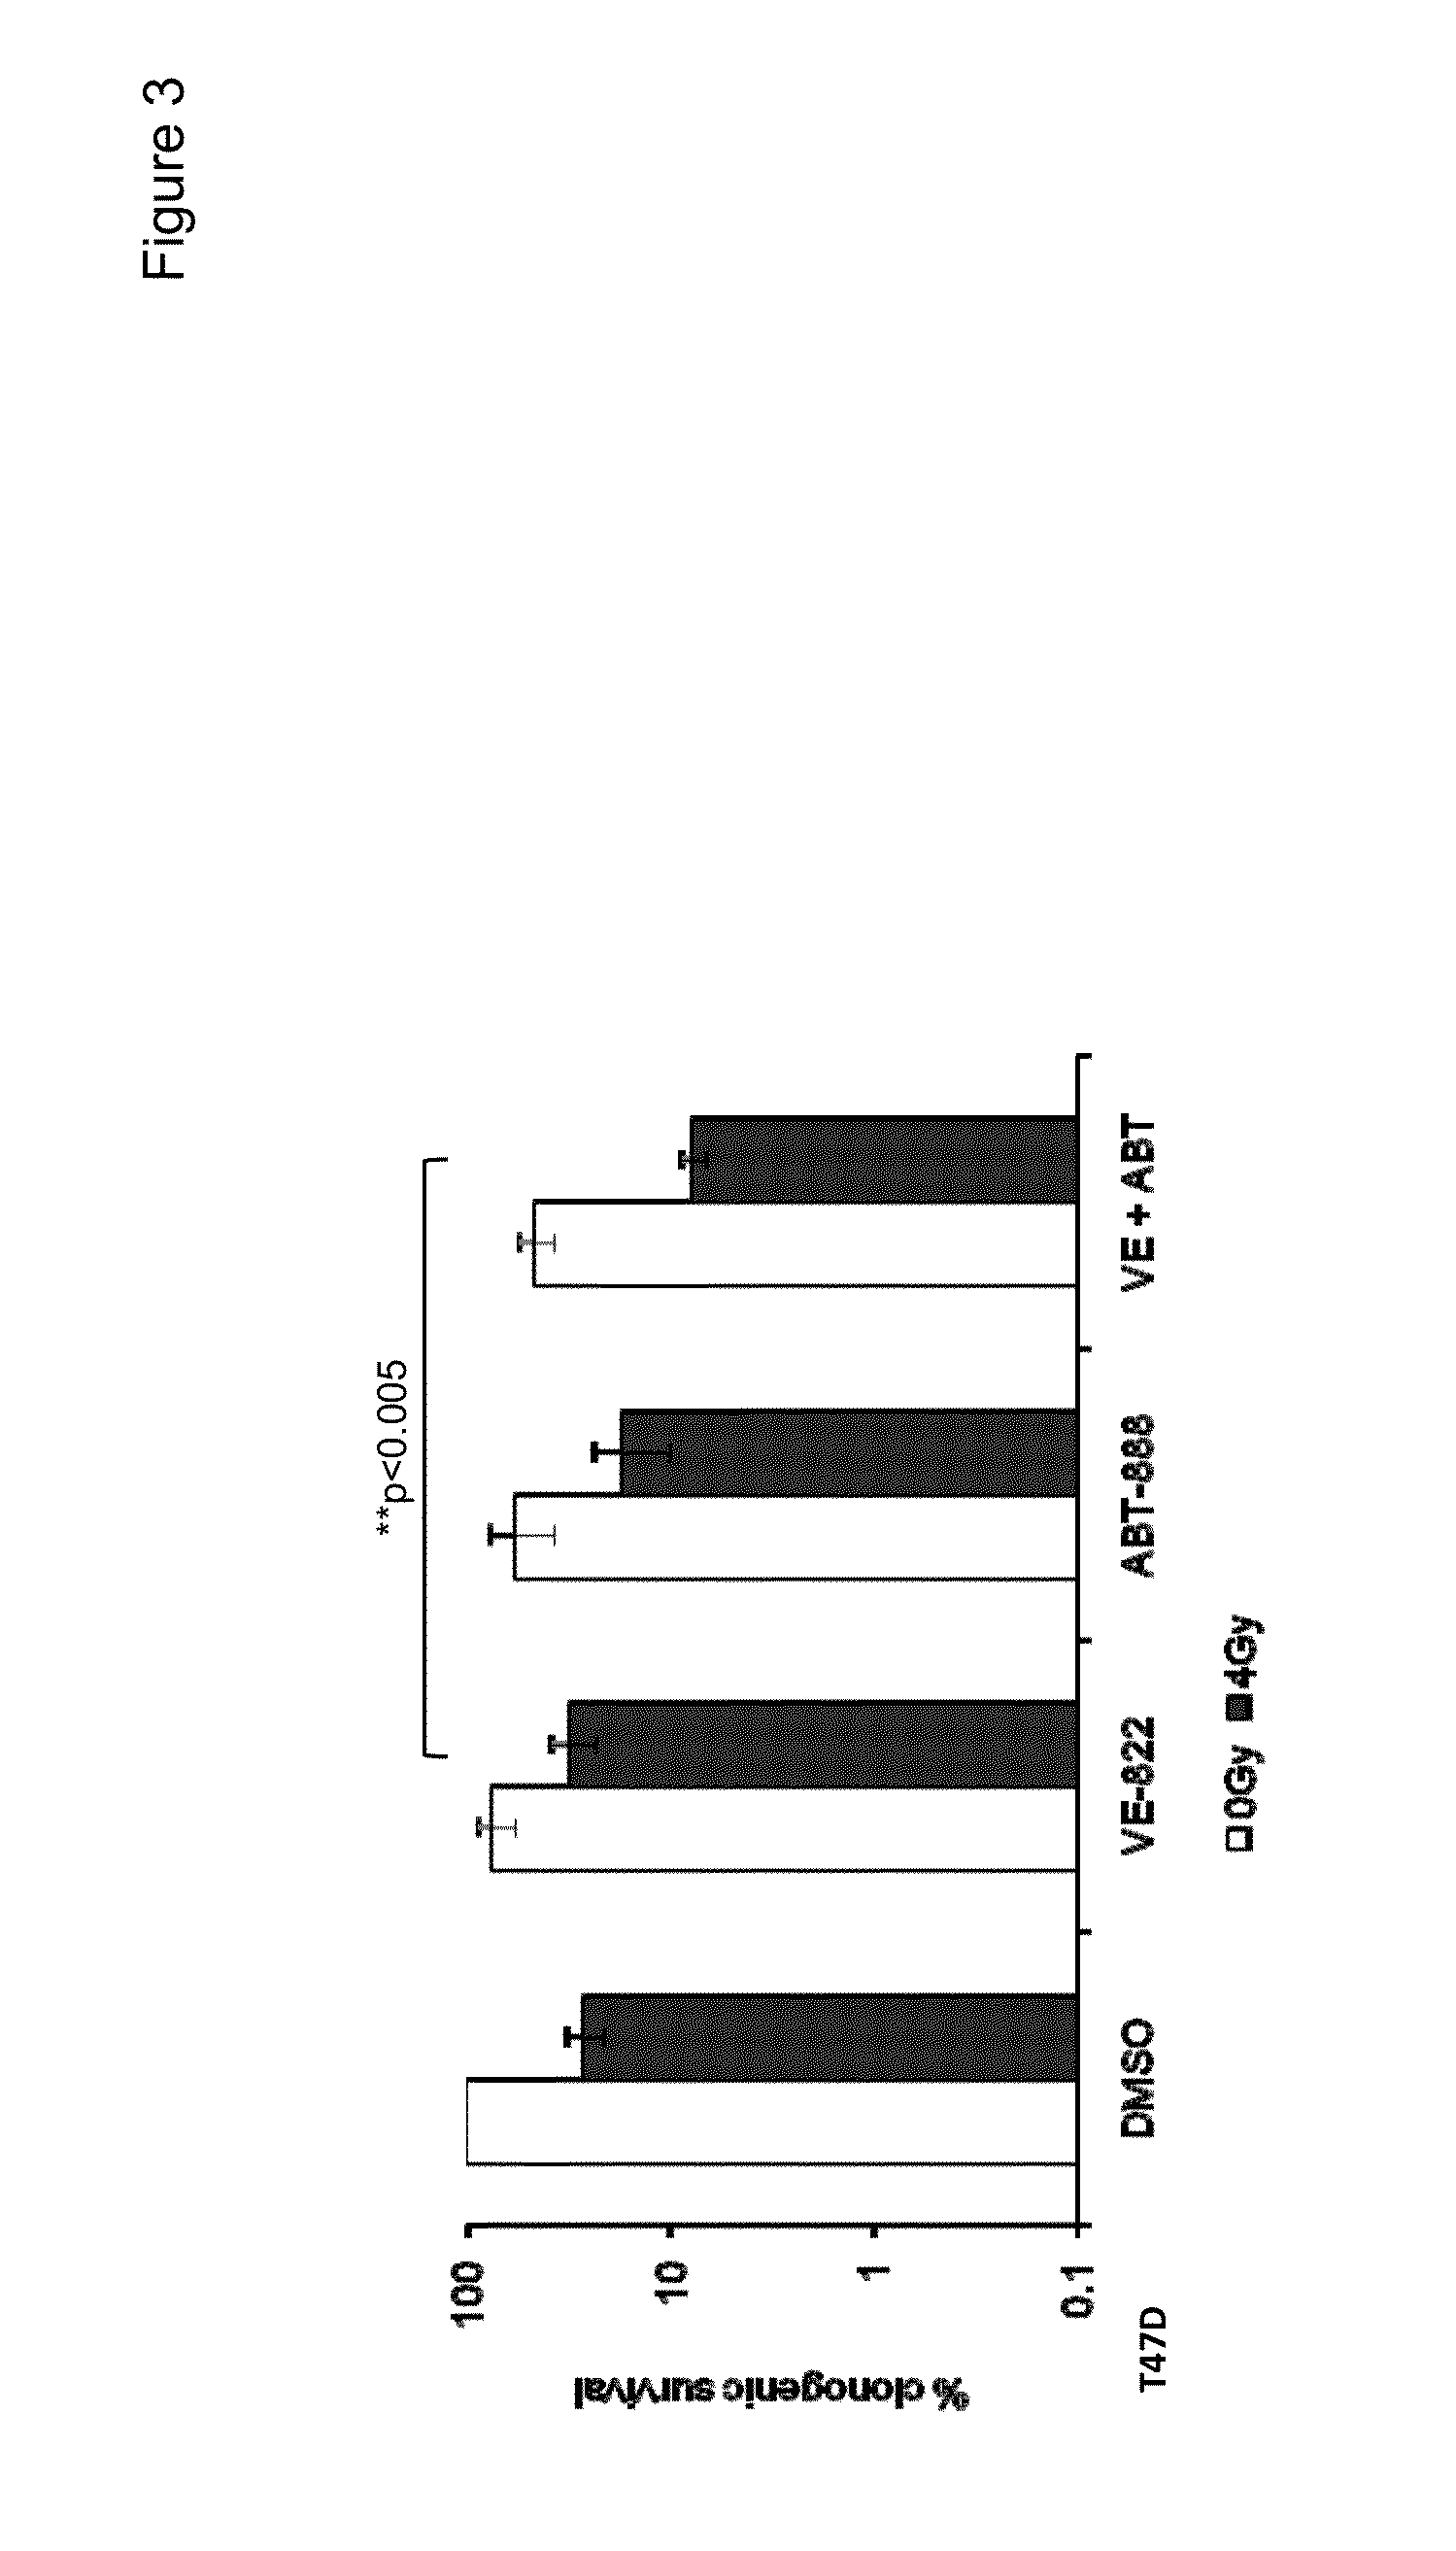 Compounds useful as inhibitors of atr kinase
and combination therapies thereof